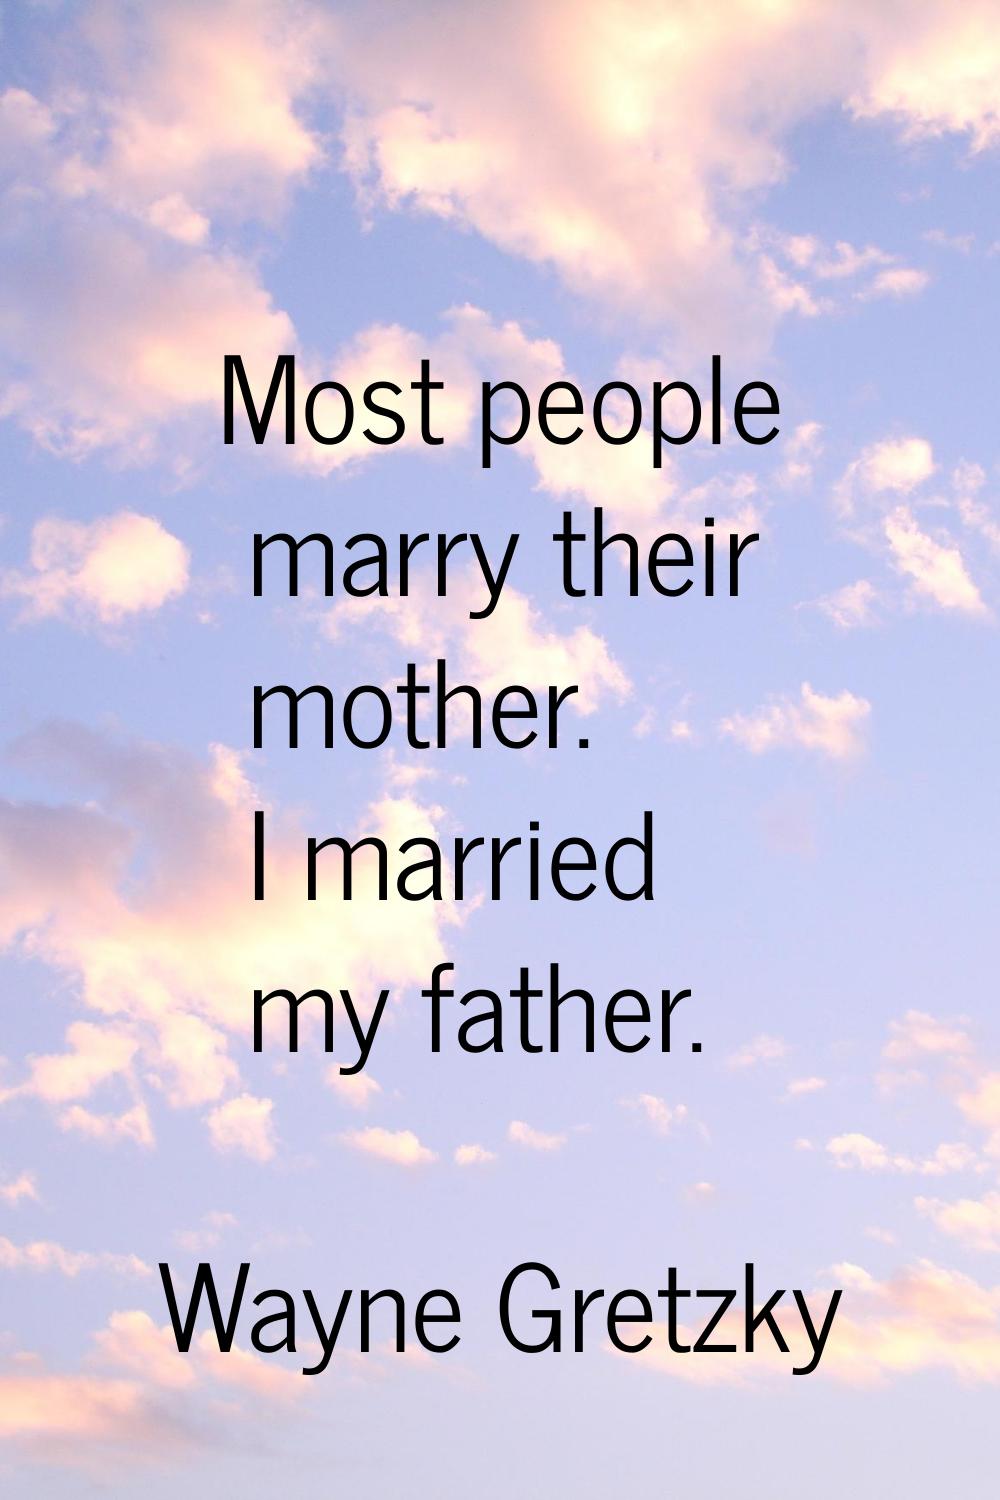 Most people marry their mother. I married my father.